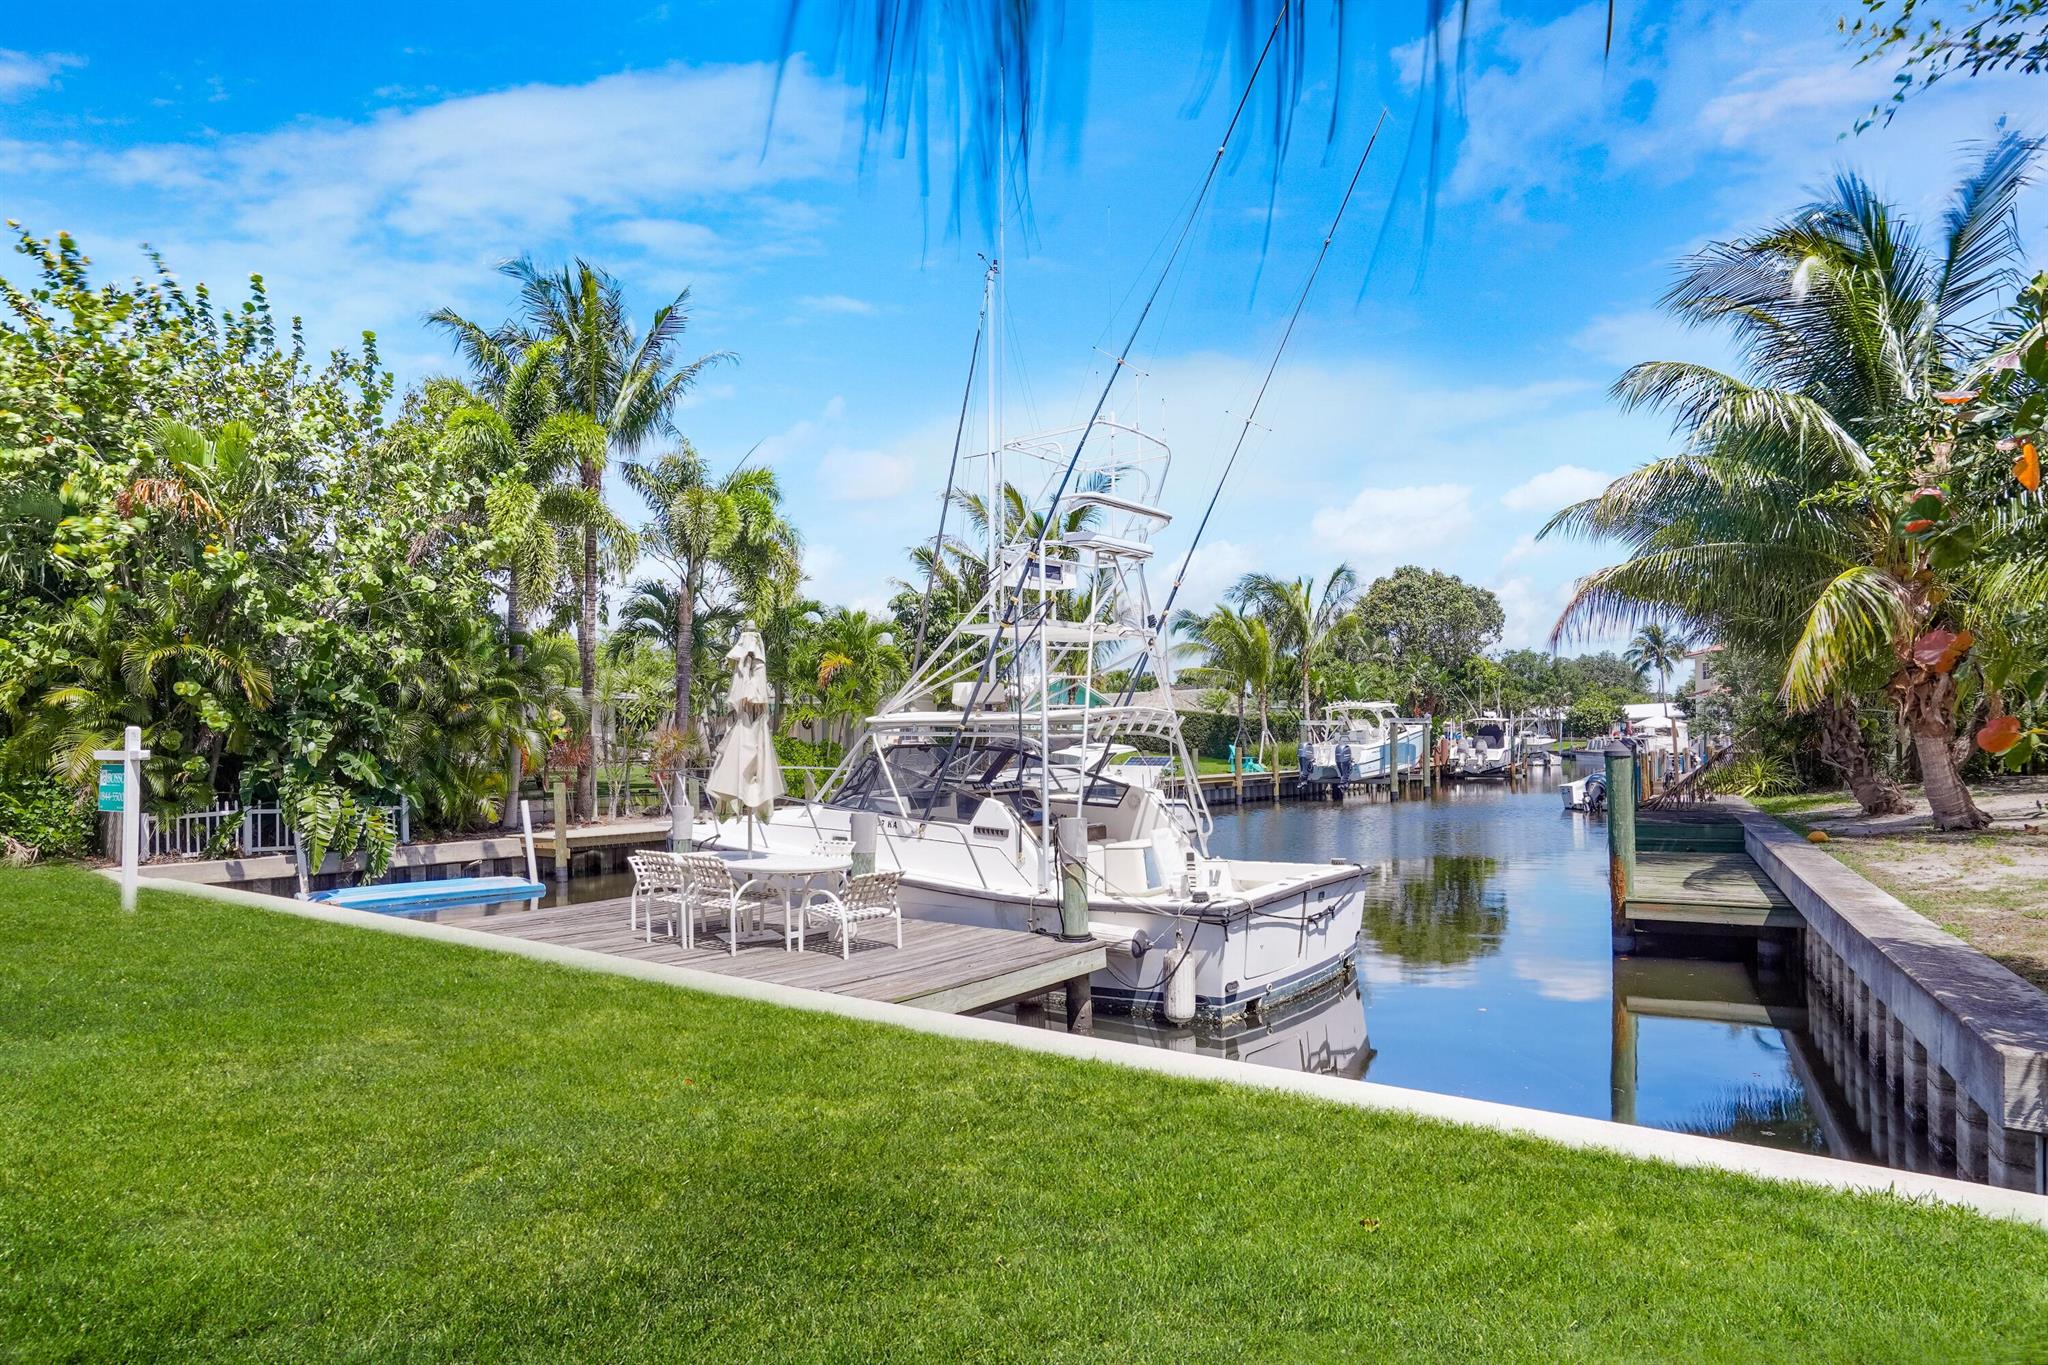 HUGE REDUCTION, NEW OFFERED PRICE - Rarely available 83'' waterfront w/ private dock, NO HOA, NO FIXED BRIDGES. Available to build new home or rebuild existing duplex. Located between the Jupiter and Palm Beach Inlets and short distance to the Gulf Stream. Canal sits just off the intracoastal waterway. Features: dock can accommodate boats up to 35', view of Palm Tree framed canal, large circular driveway. Bike ride distance to Juno Beach. Minutes to Jupiter, Palm Beach Gardens, West Palm Beach, & 25 min. from PBI Airport. Current duplex is not habitable as-is and septic needs replacing. Location cannot be beat! Easy to view.